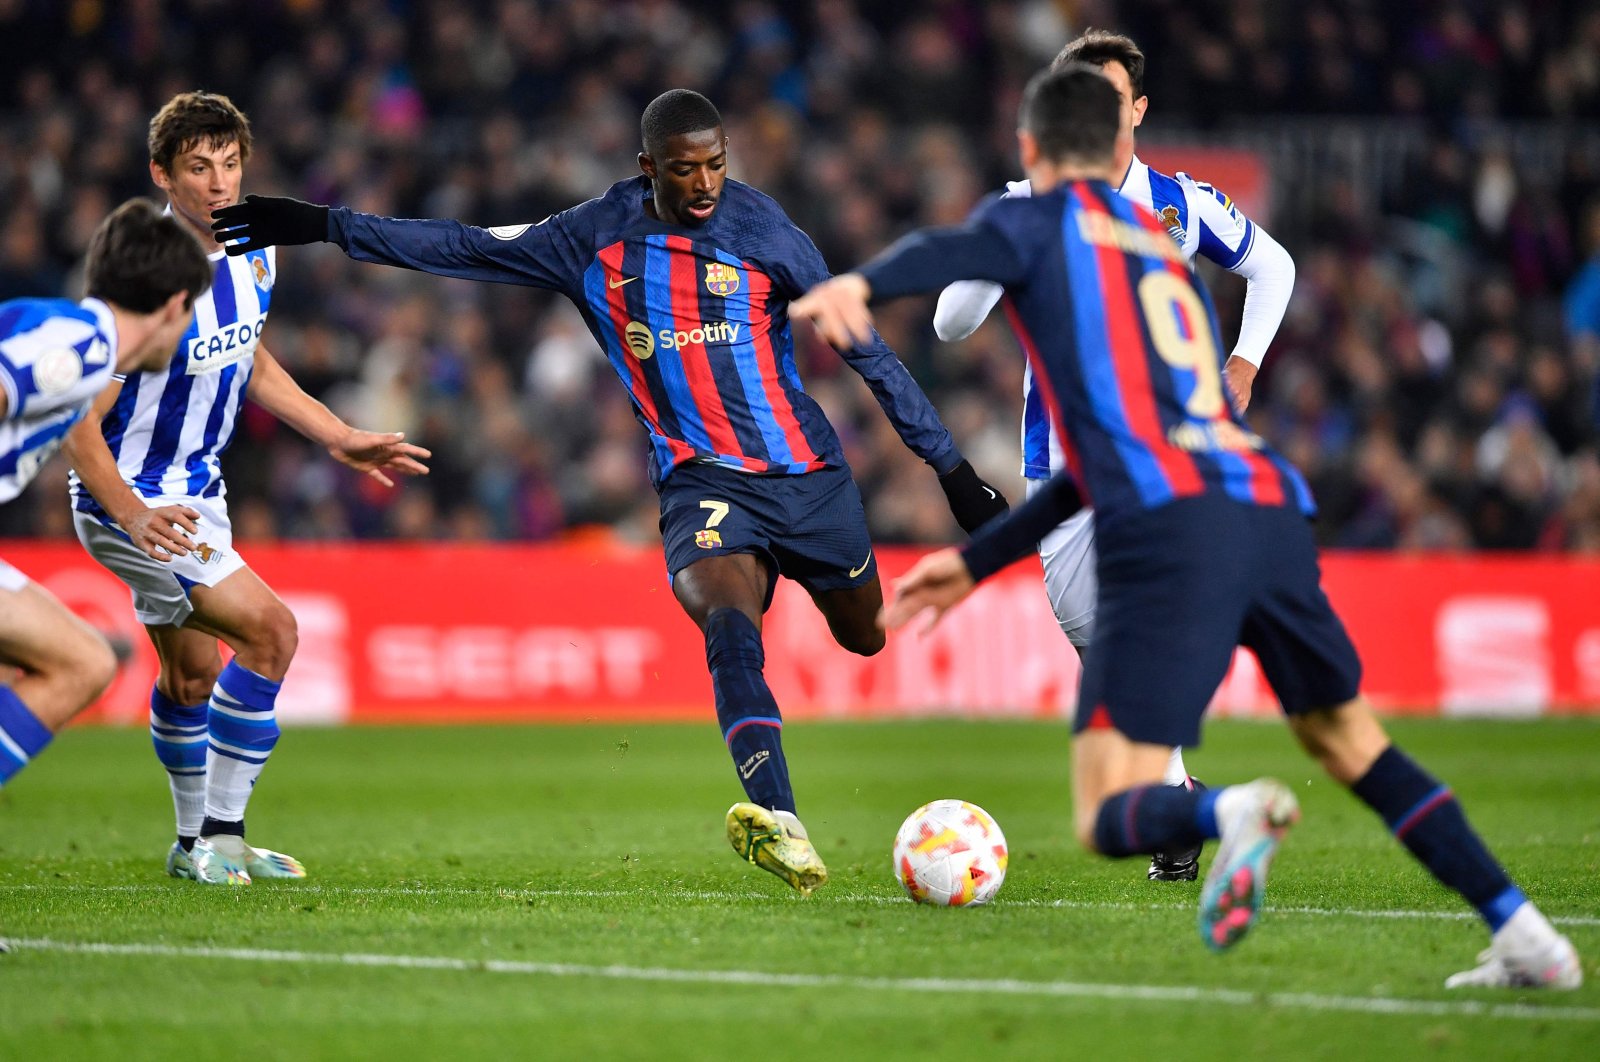 Barcelona&#039;s French forward Ousmane Dembele (C) kicks the ball during the Copa del Rey quarter final football match against Real Sociedad, at the Camp Nou stadium, Barcelona, Spain, Jan. 25, 2023. (AFP Photo)